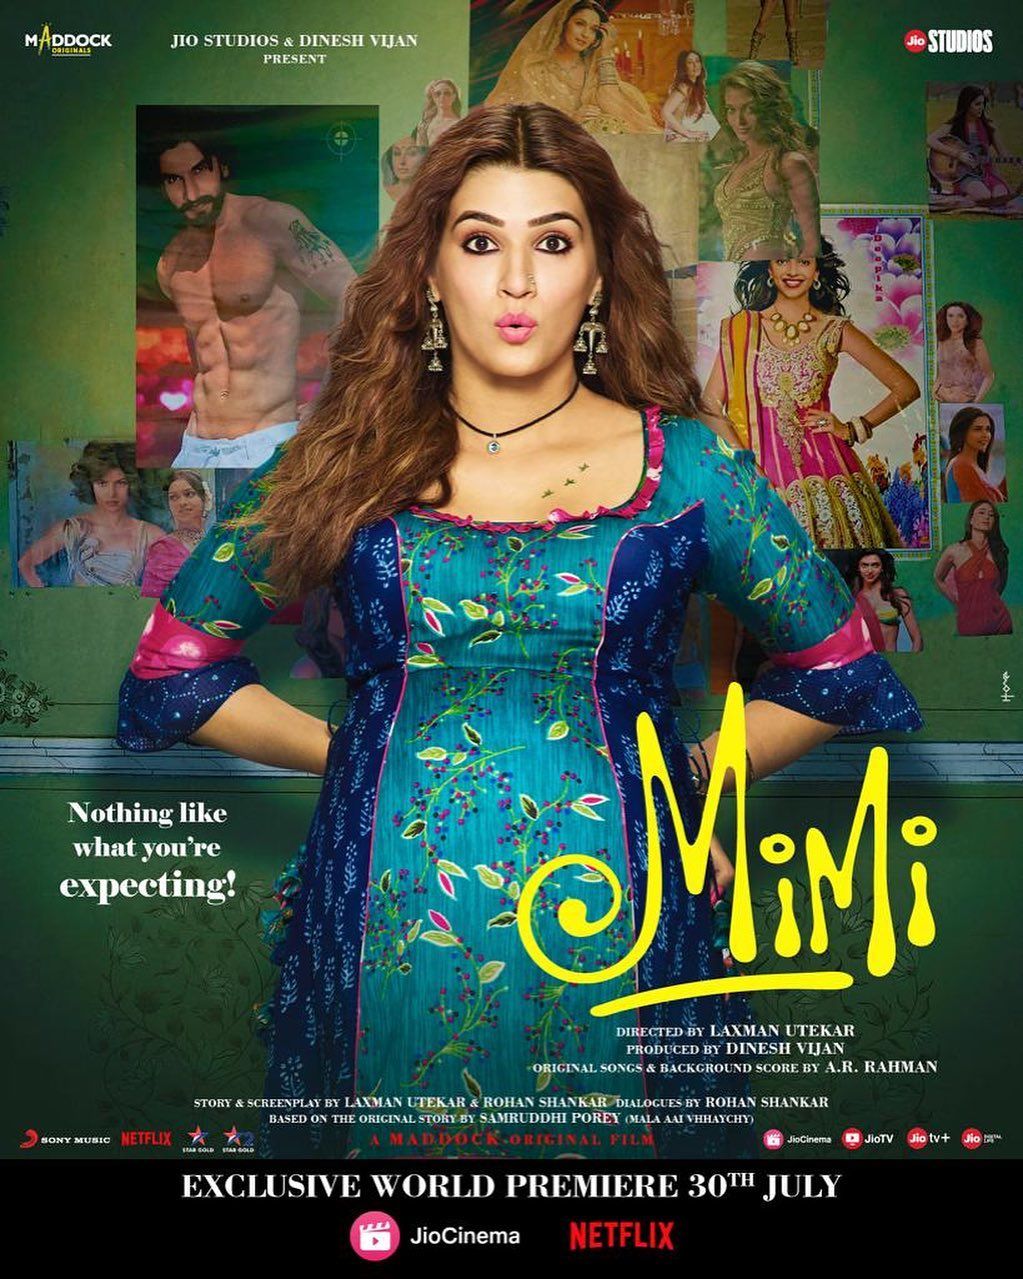 Kriti Sanon is over the moon with joy after fans shower Mimi trailer with love